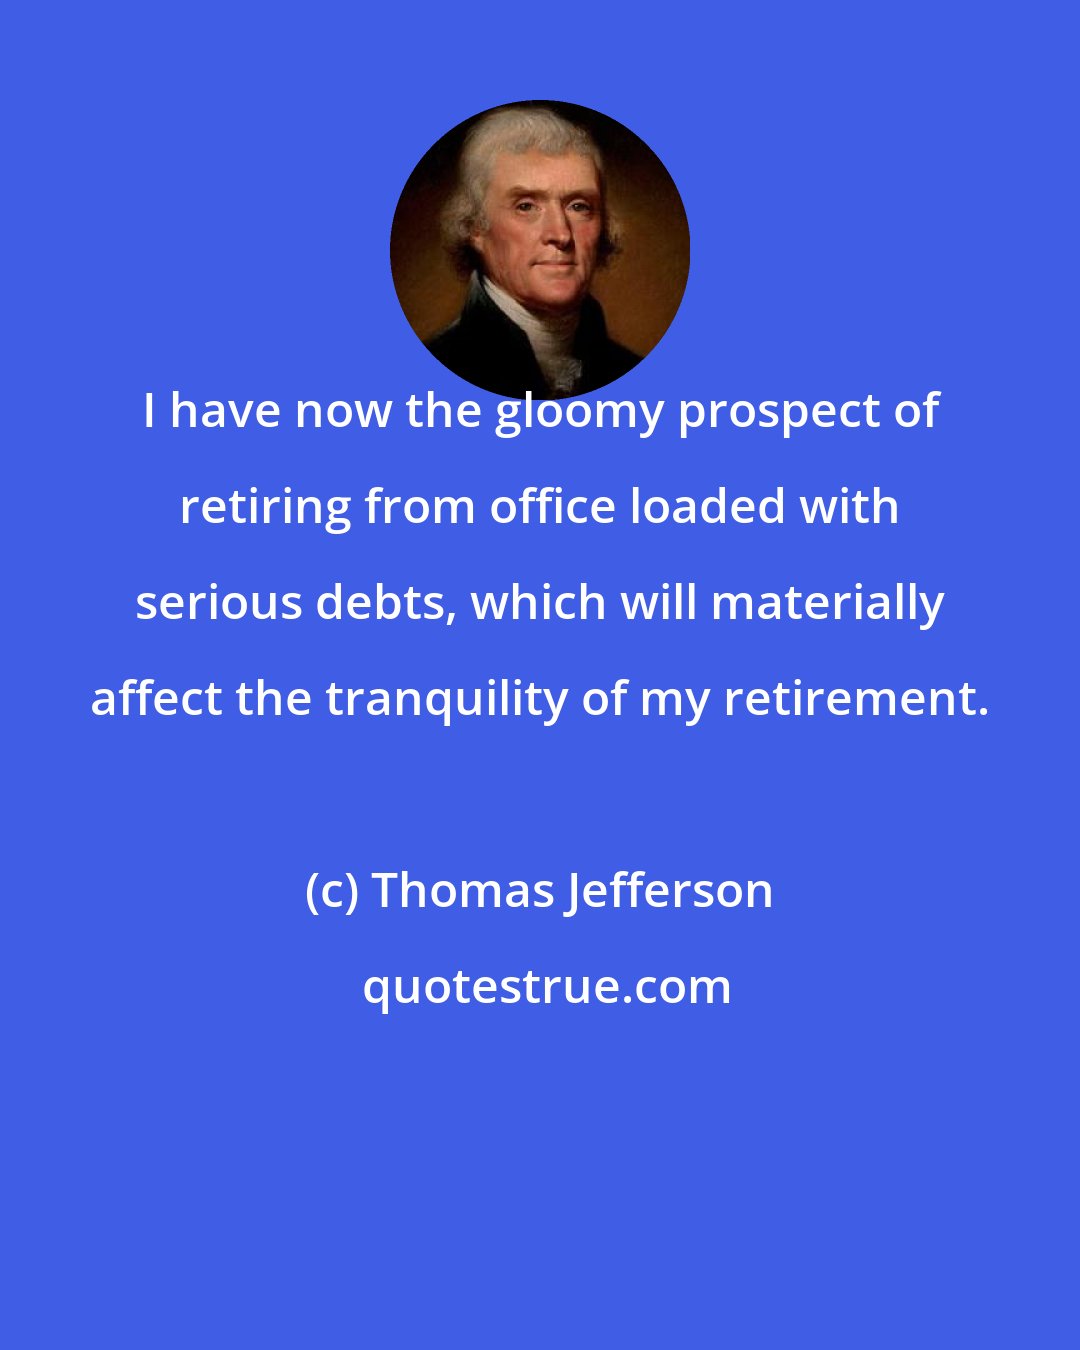 Thomas Jefferson: I have now the gloomy prospect of retiring from office loaded with serious debts, which will materially affect the tranquility of my retirement.